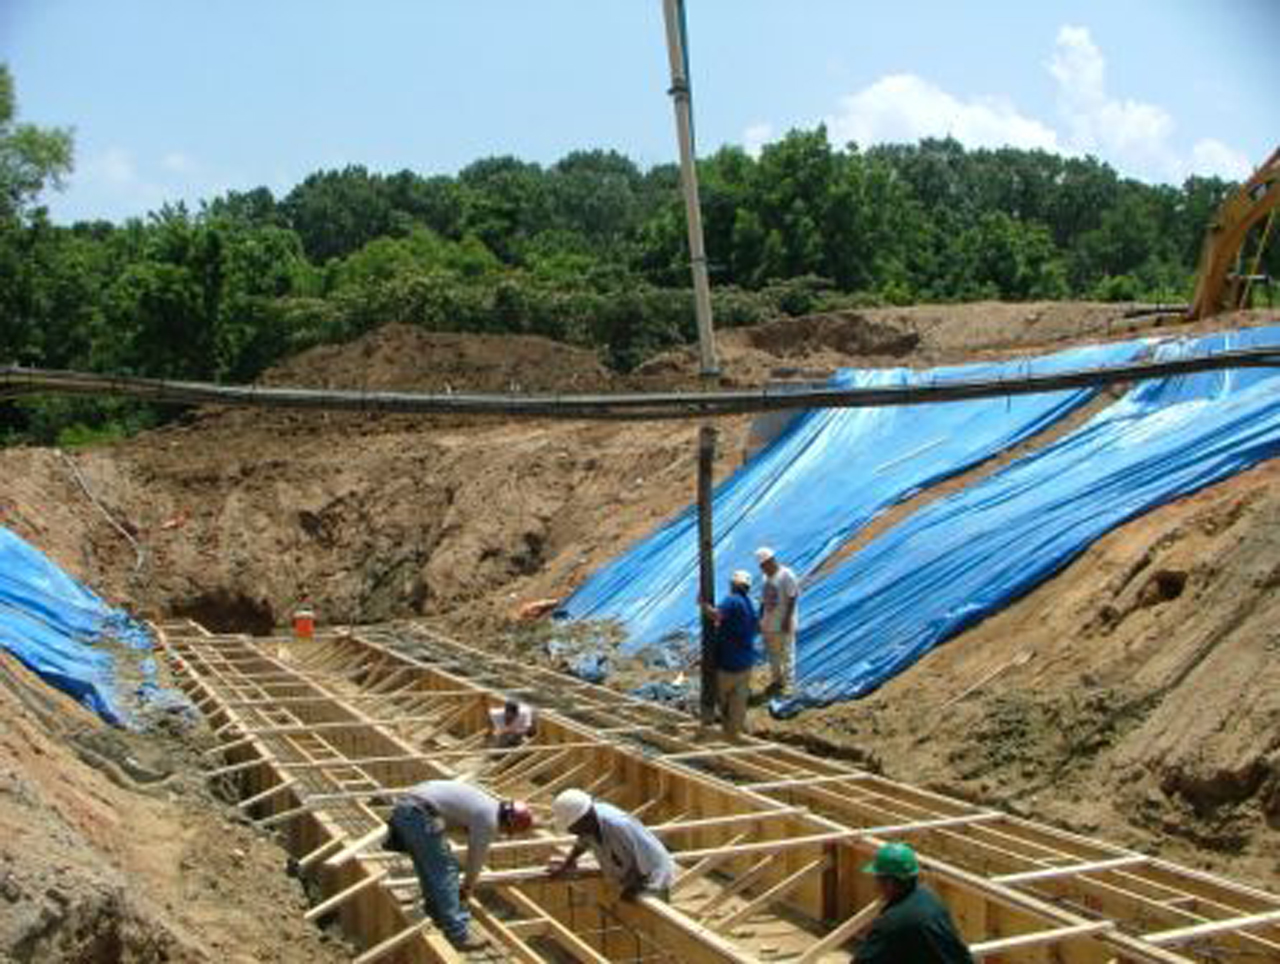 HALL employees working on building a tunnel in Concord, NC with blue tarp laid out